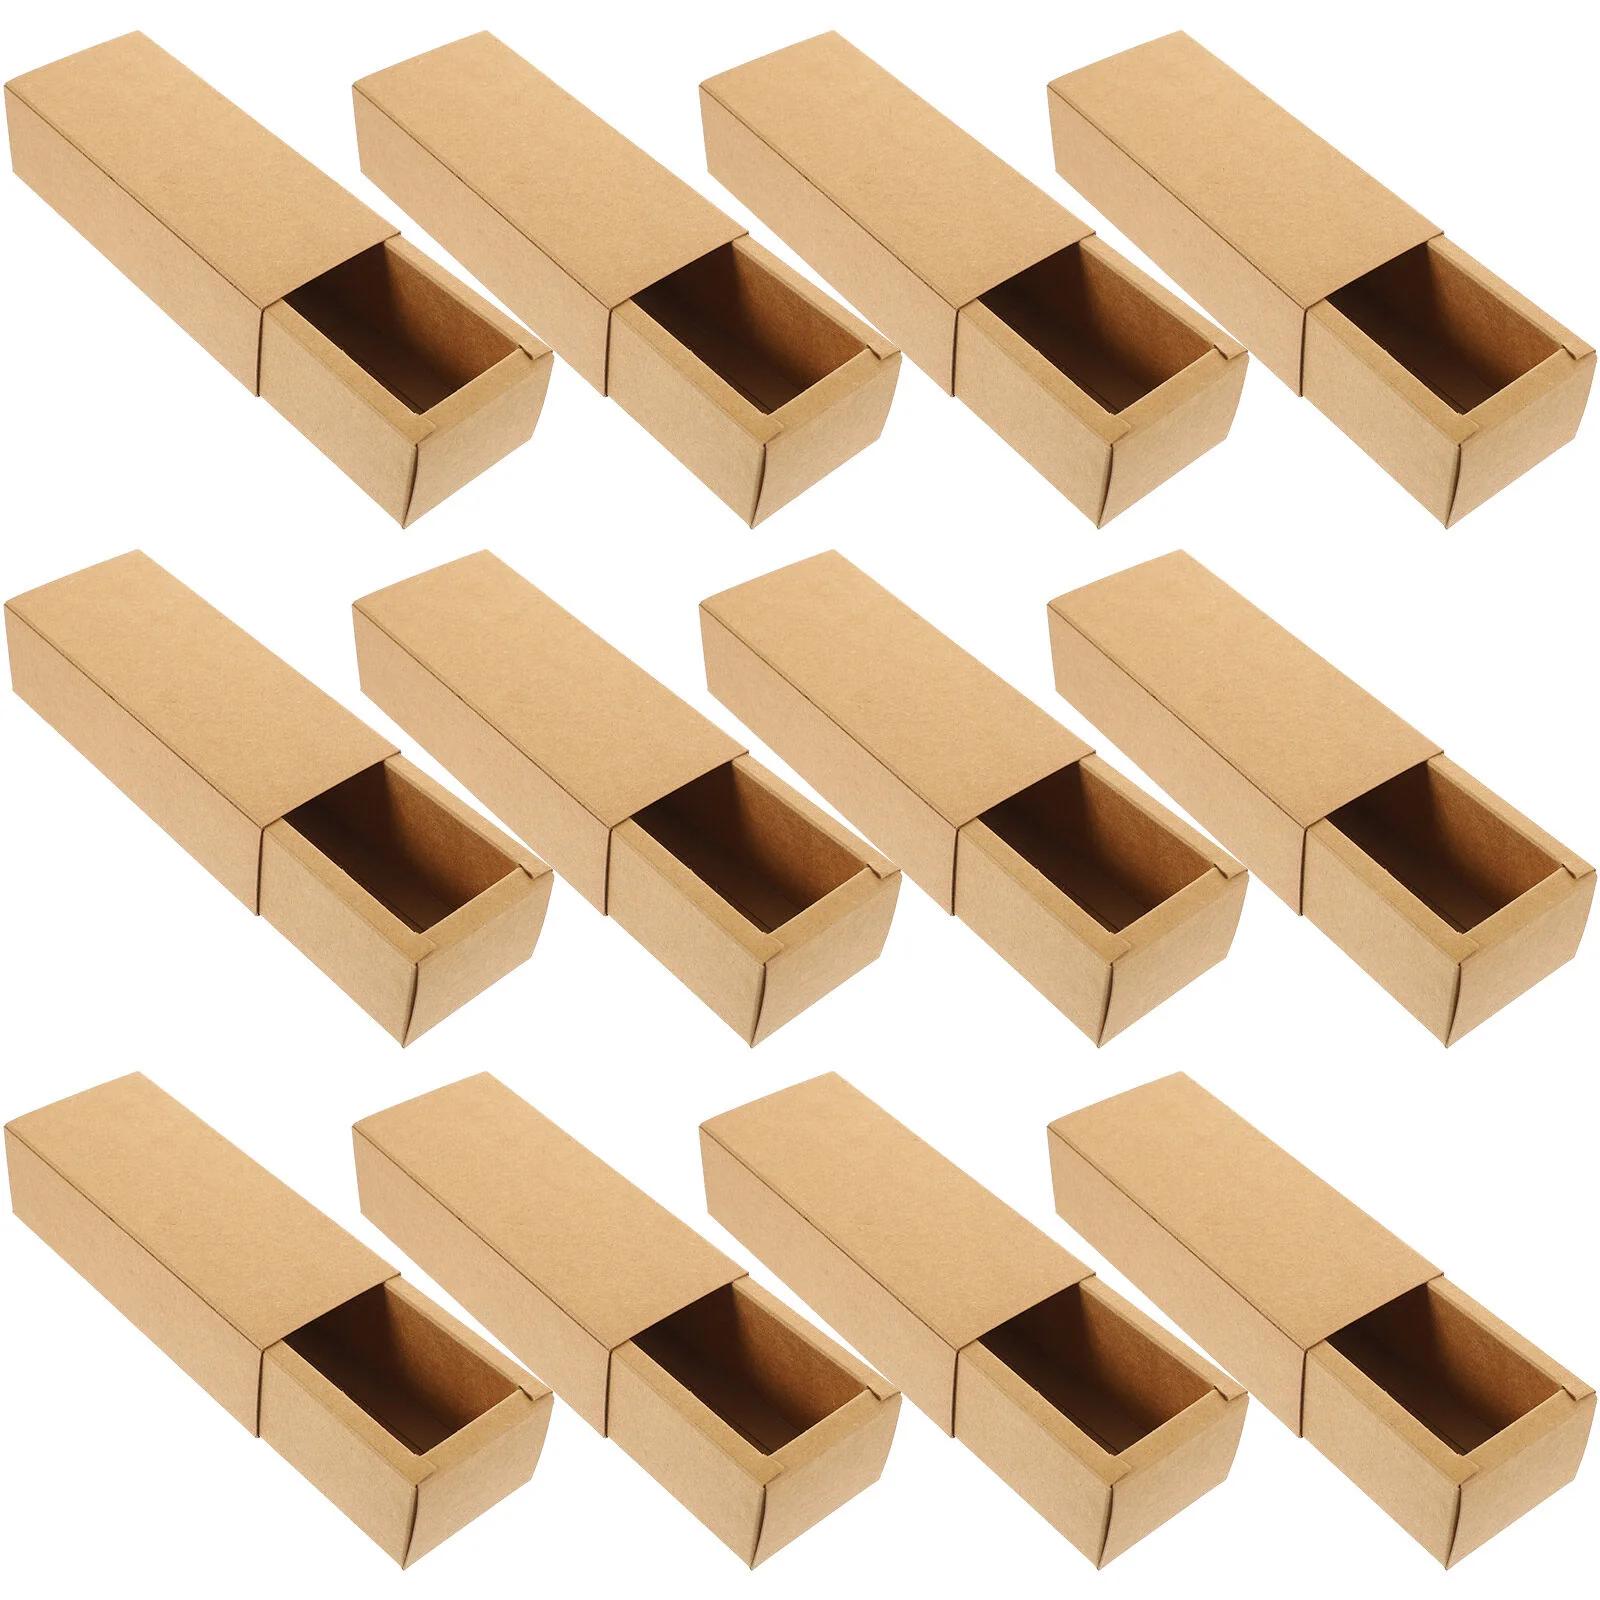 

12 Pcs Maid Honor Gift Cardboard Packages Small Box Kraft Paper Wrapping Organizer Storage Bridesmaid